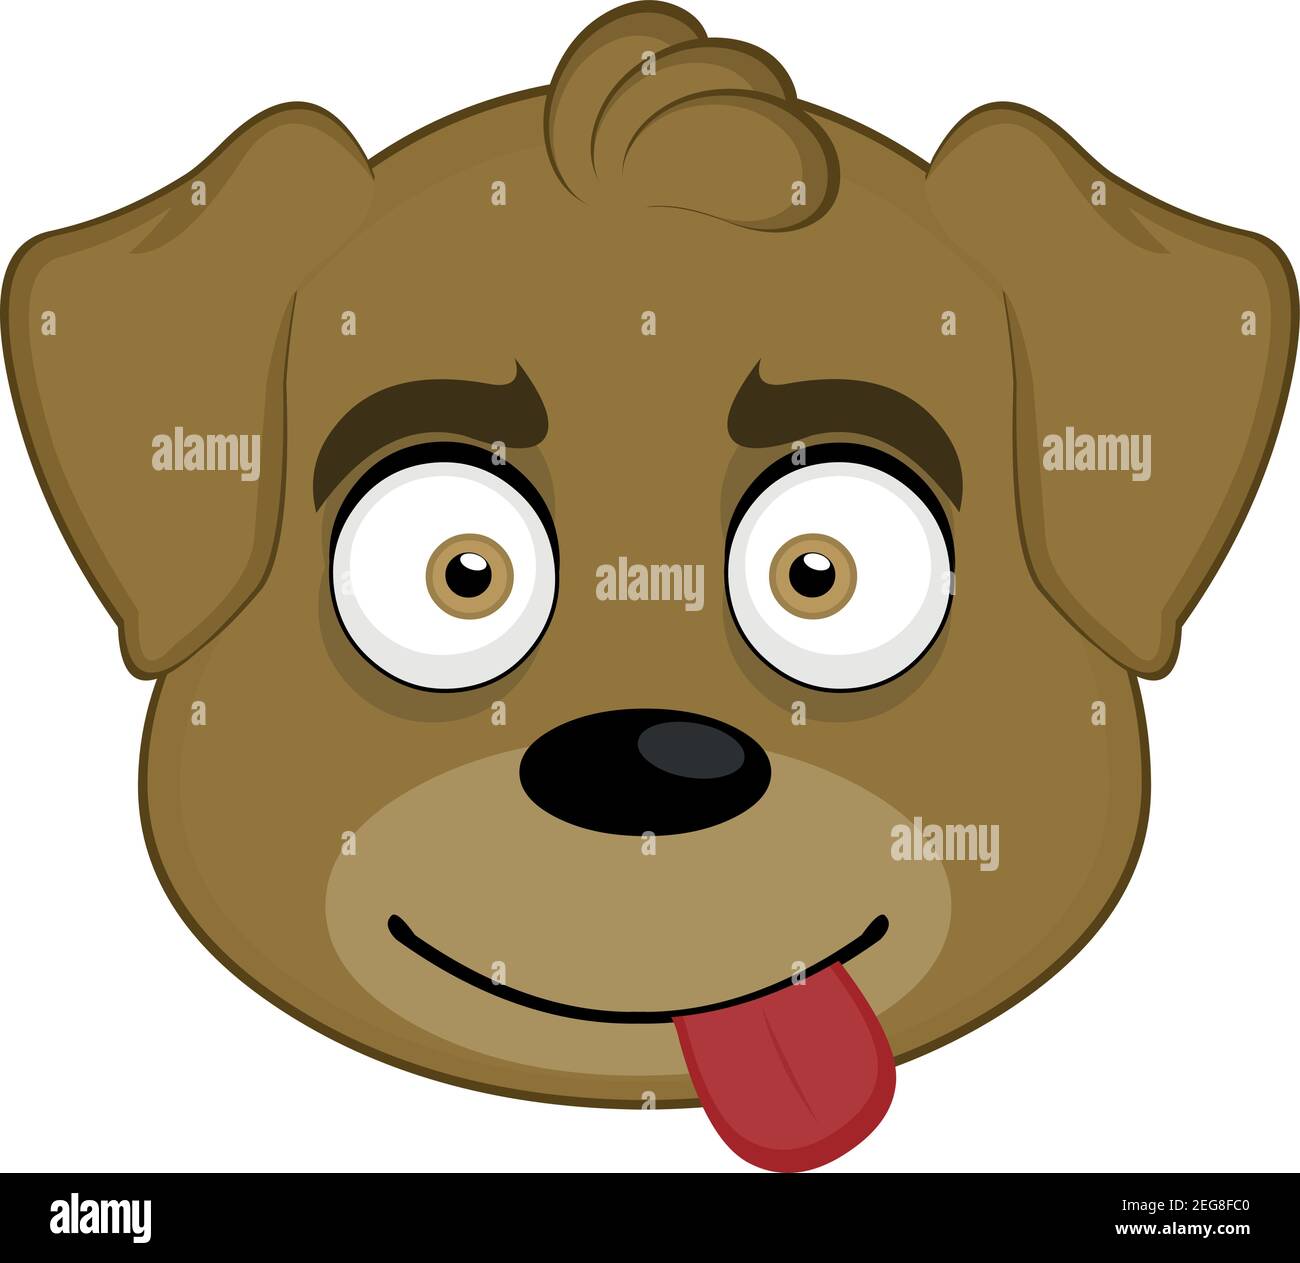 Vector emoticon illustration of a cartoon dog's face with a happy expression and tongue sticking out Stock Vector